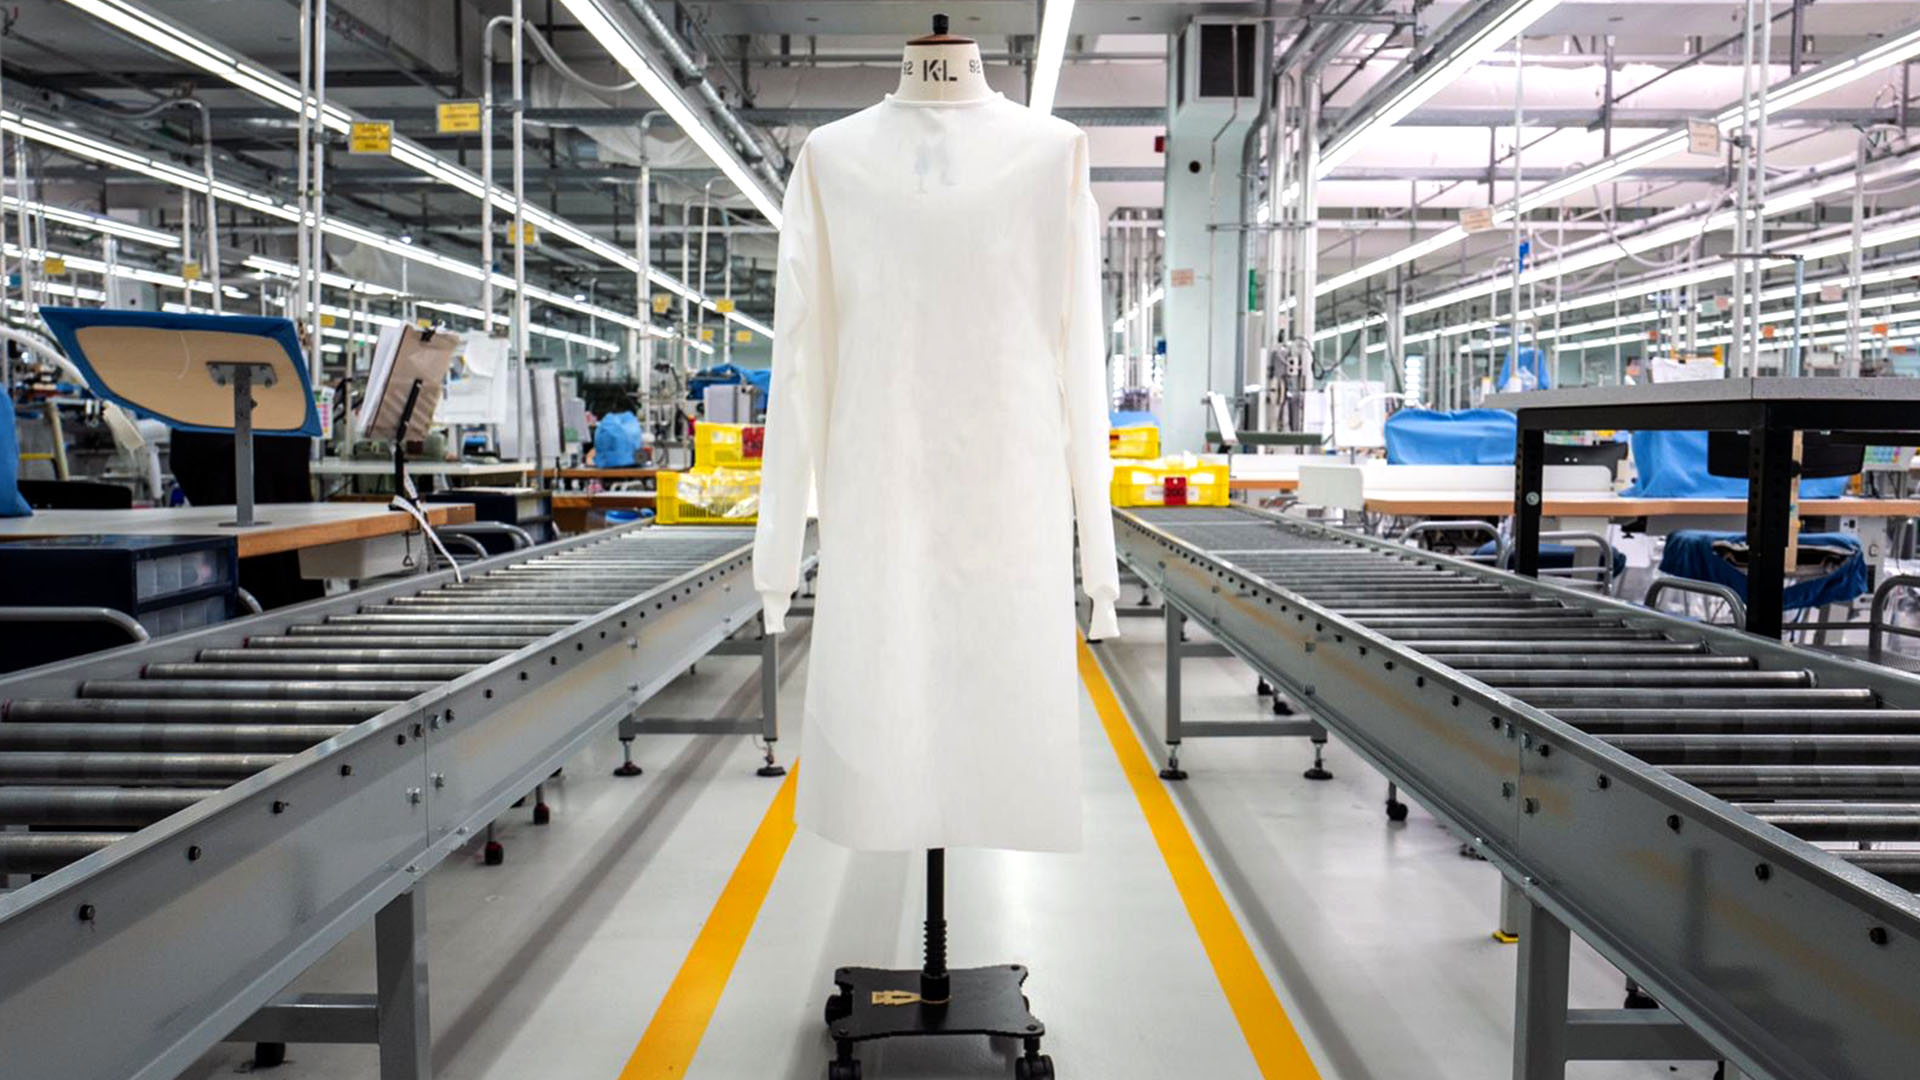 THE ZEGNA GROUP TO MANUFACTURE 280,000 PROTECTIVE HOSPITAL SUITS